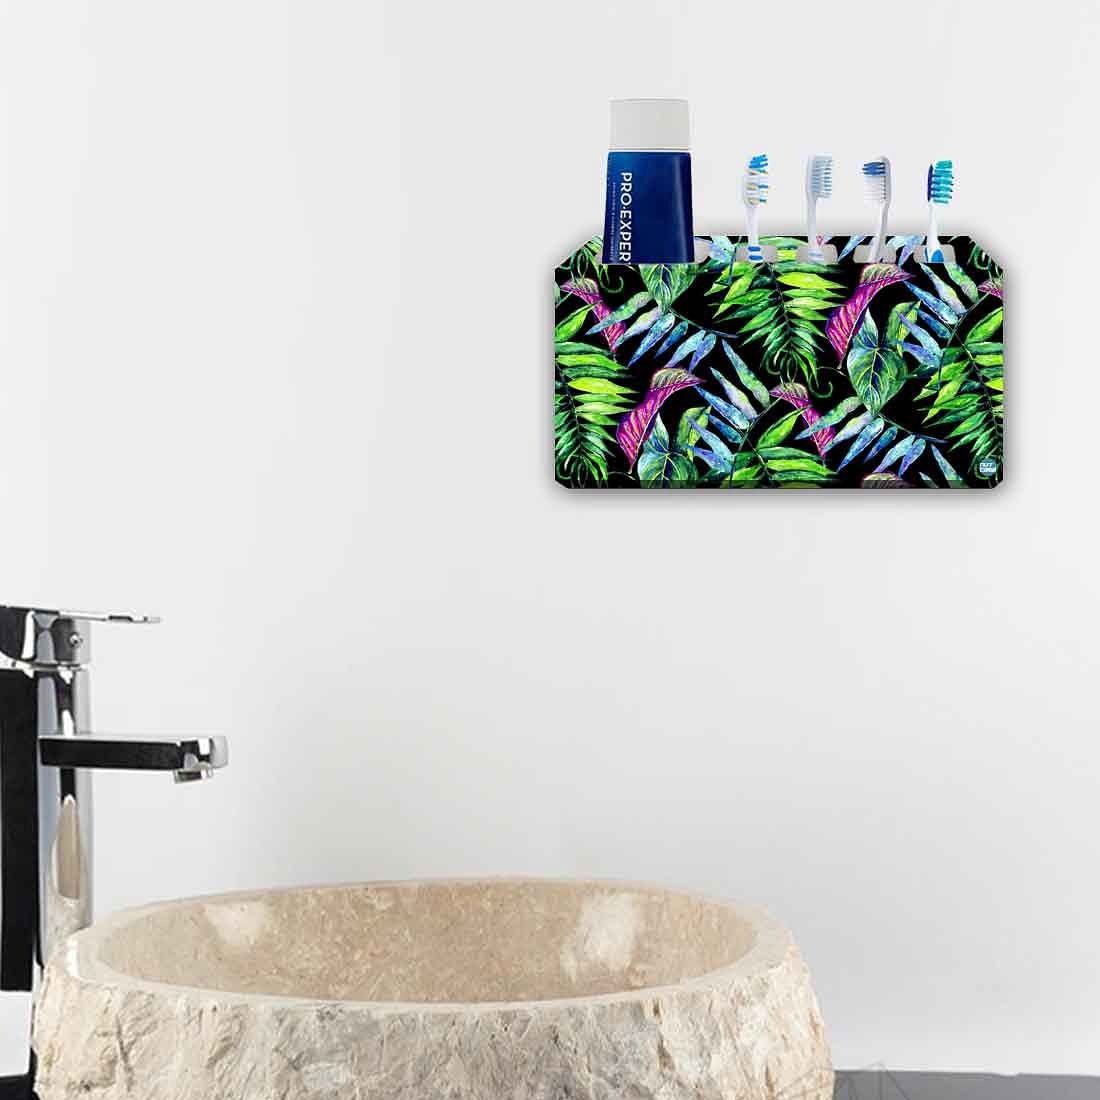 Toothbrush Holder Wall Mounted -Purple and Green Tropical Leaf Nutcase